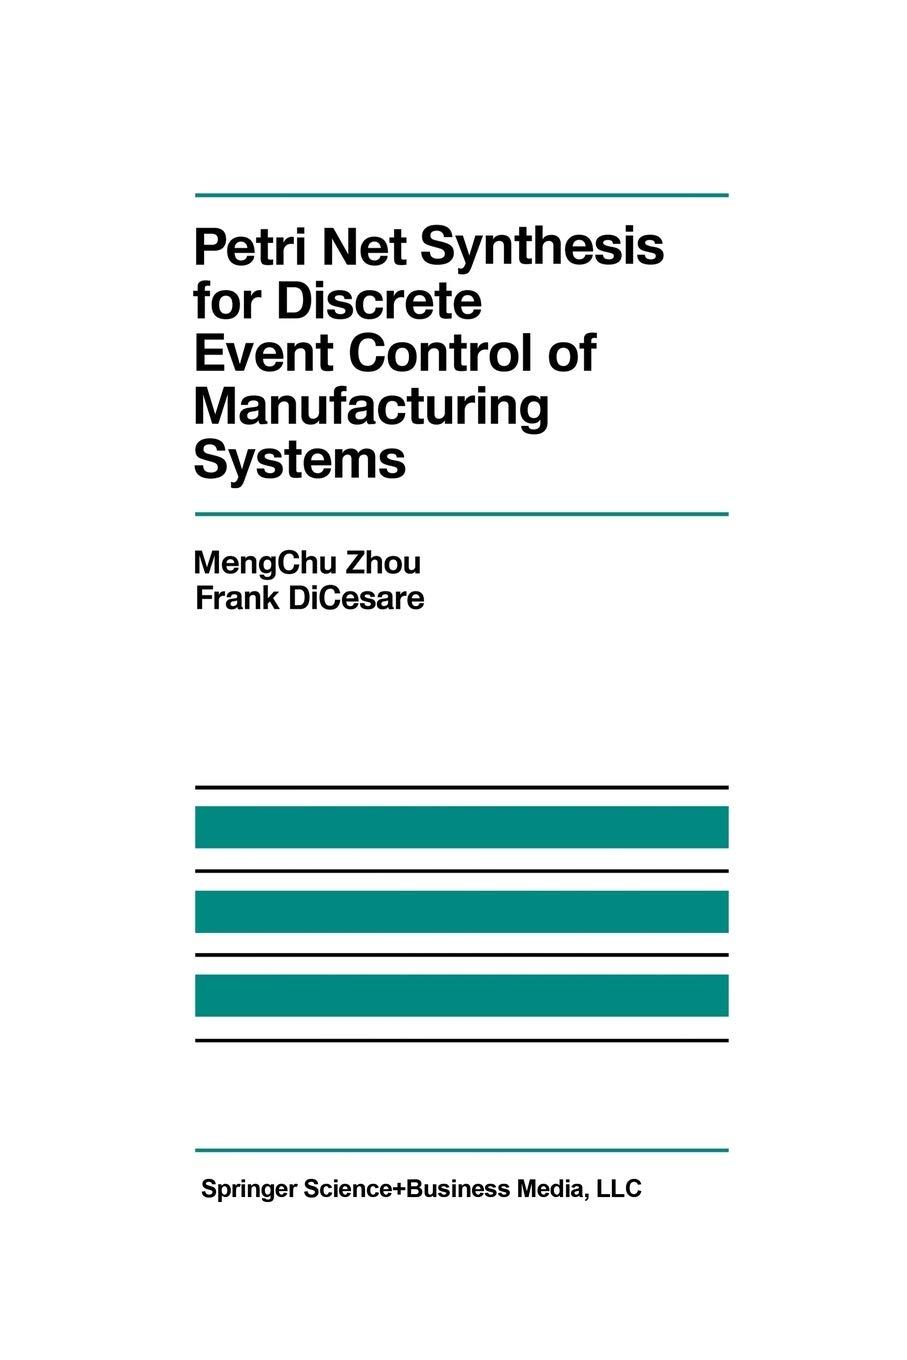 petri net synthesis for discrete event control of manufacturing systems 1993 edition mengchu zhou, f.